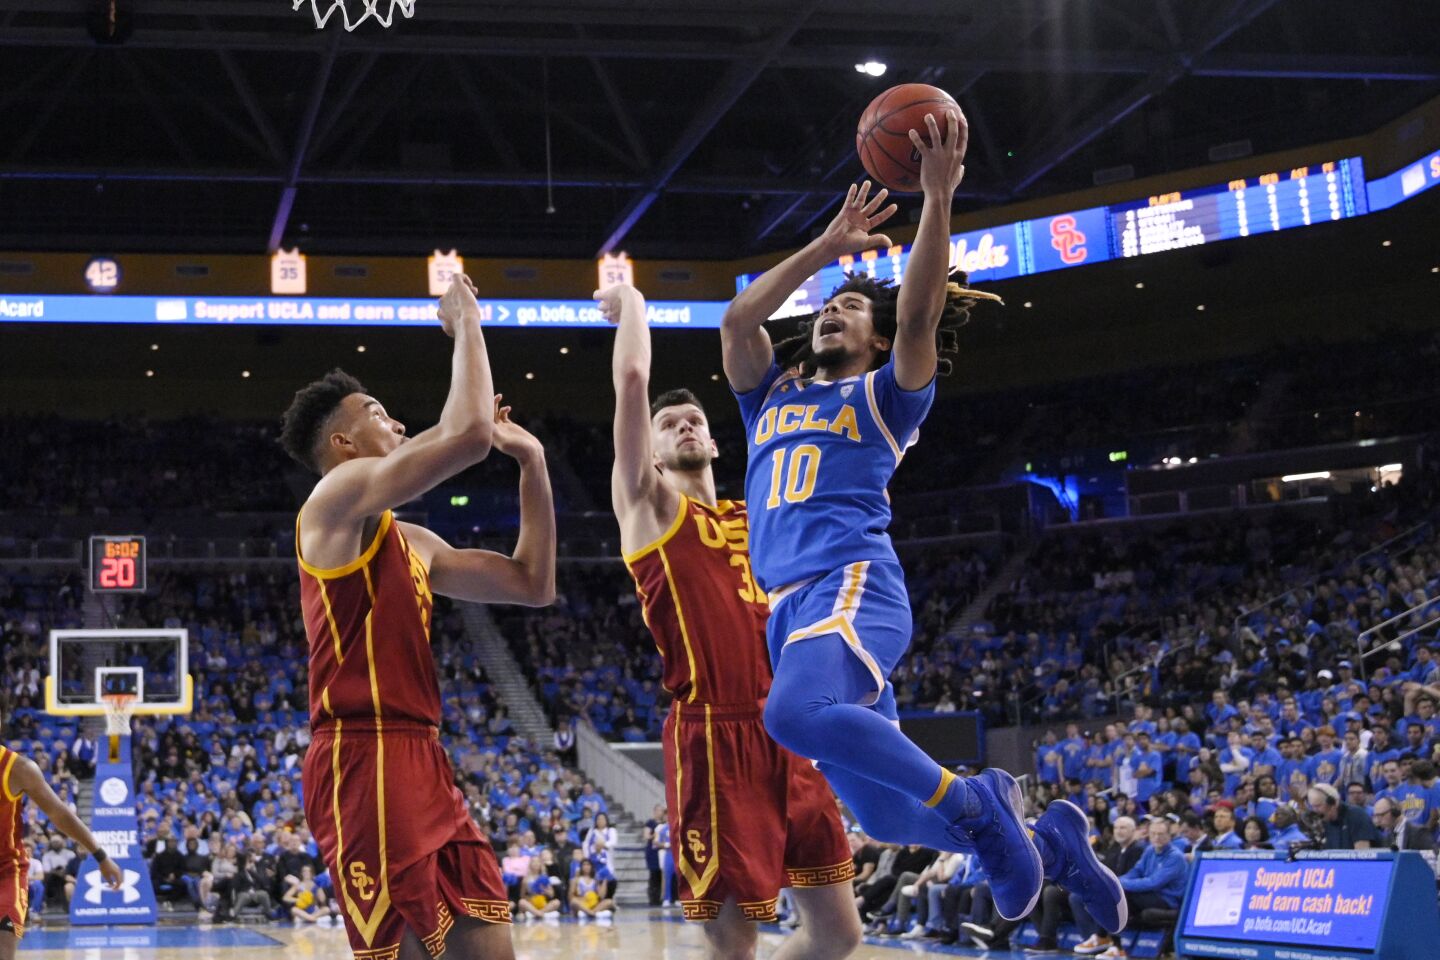 UCLA guard Tyger Campbell puts up a shot during a game against USC on Jan. 11 at Pauley Pavilion.